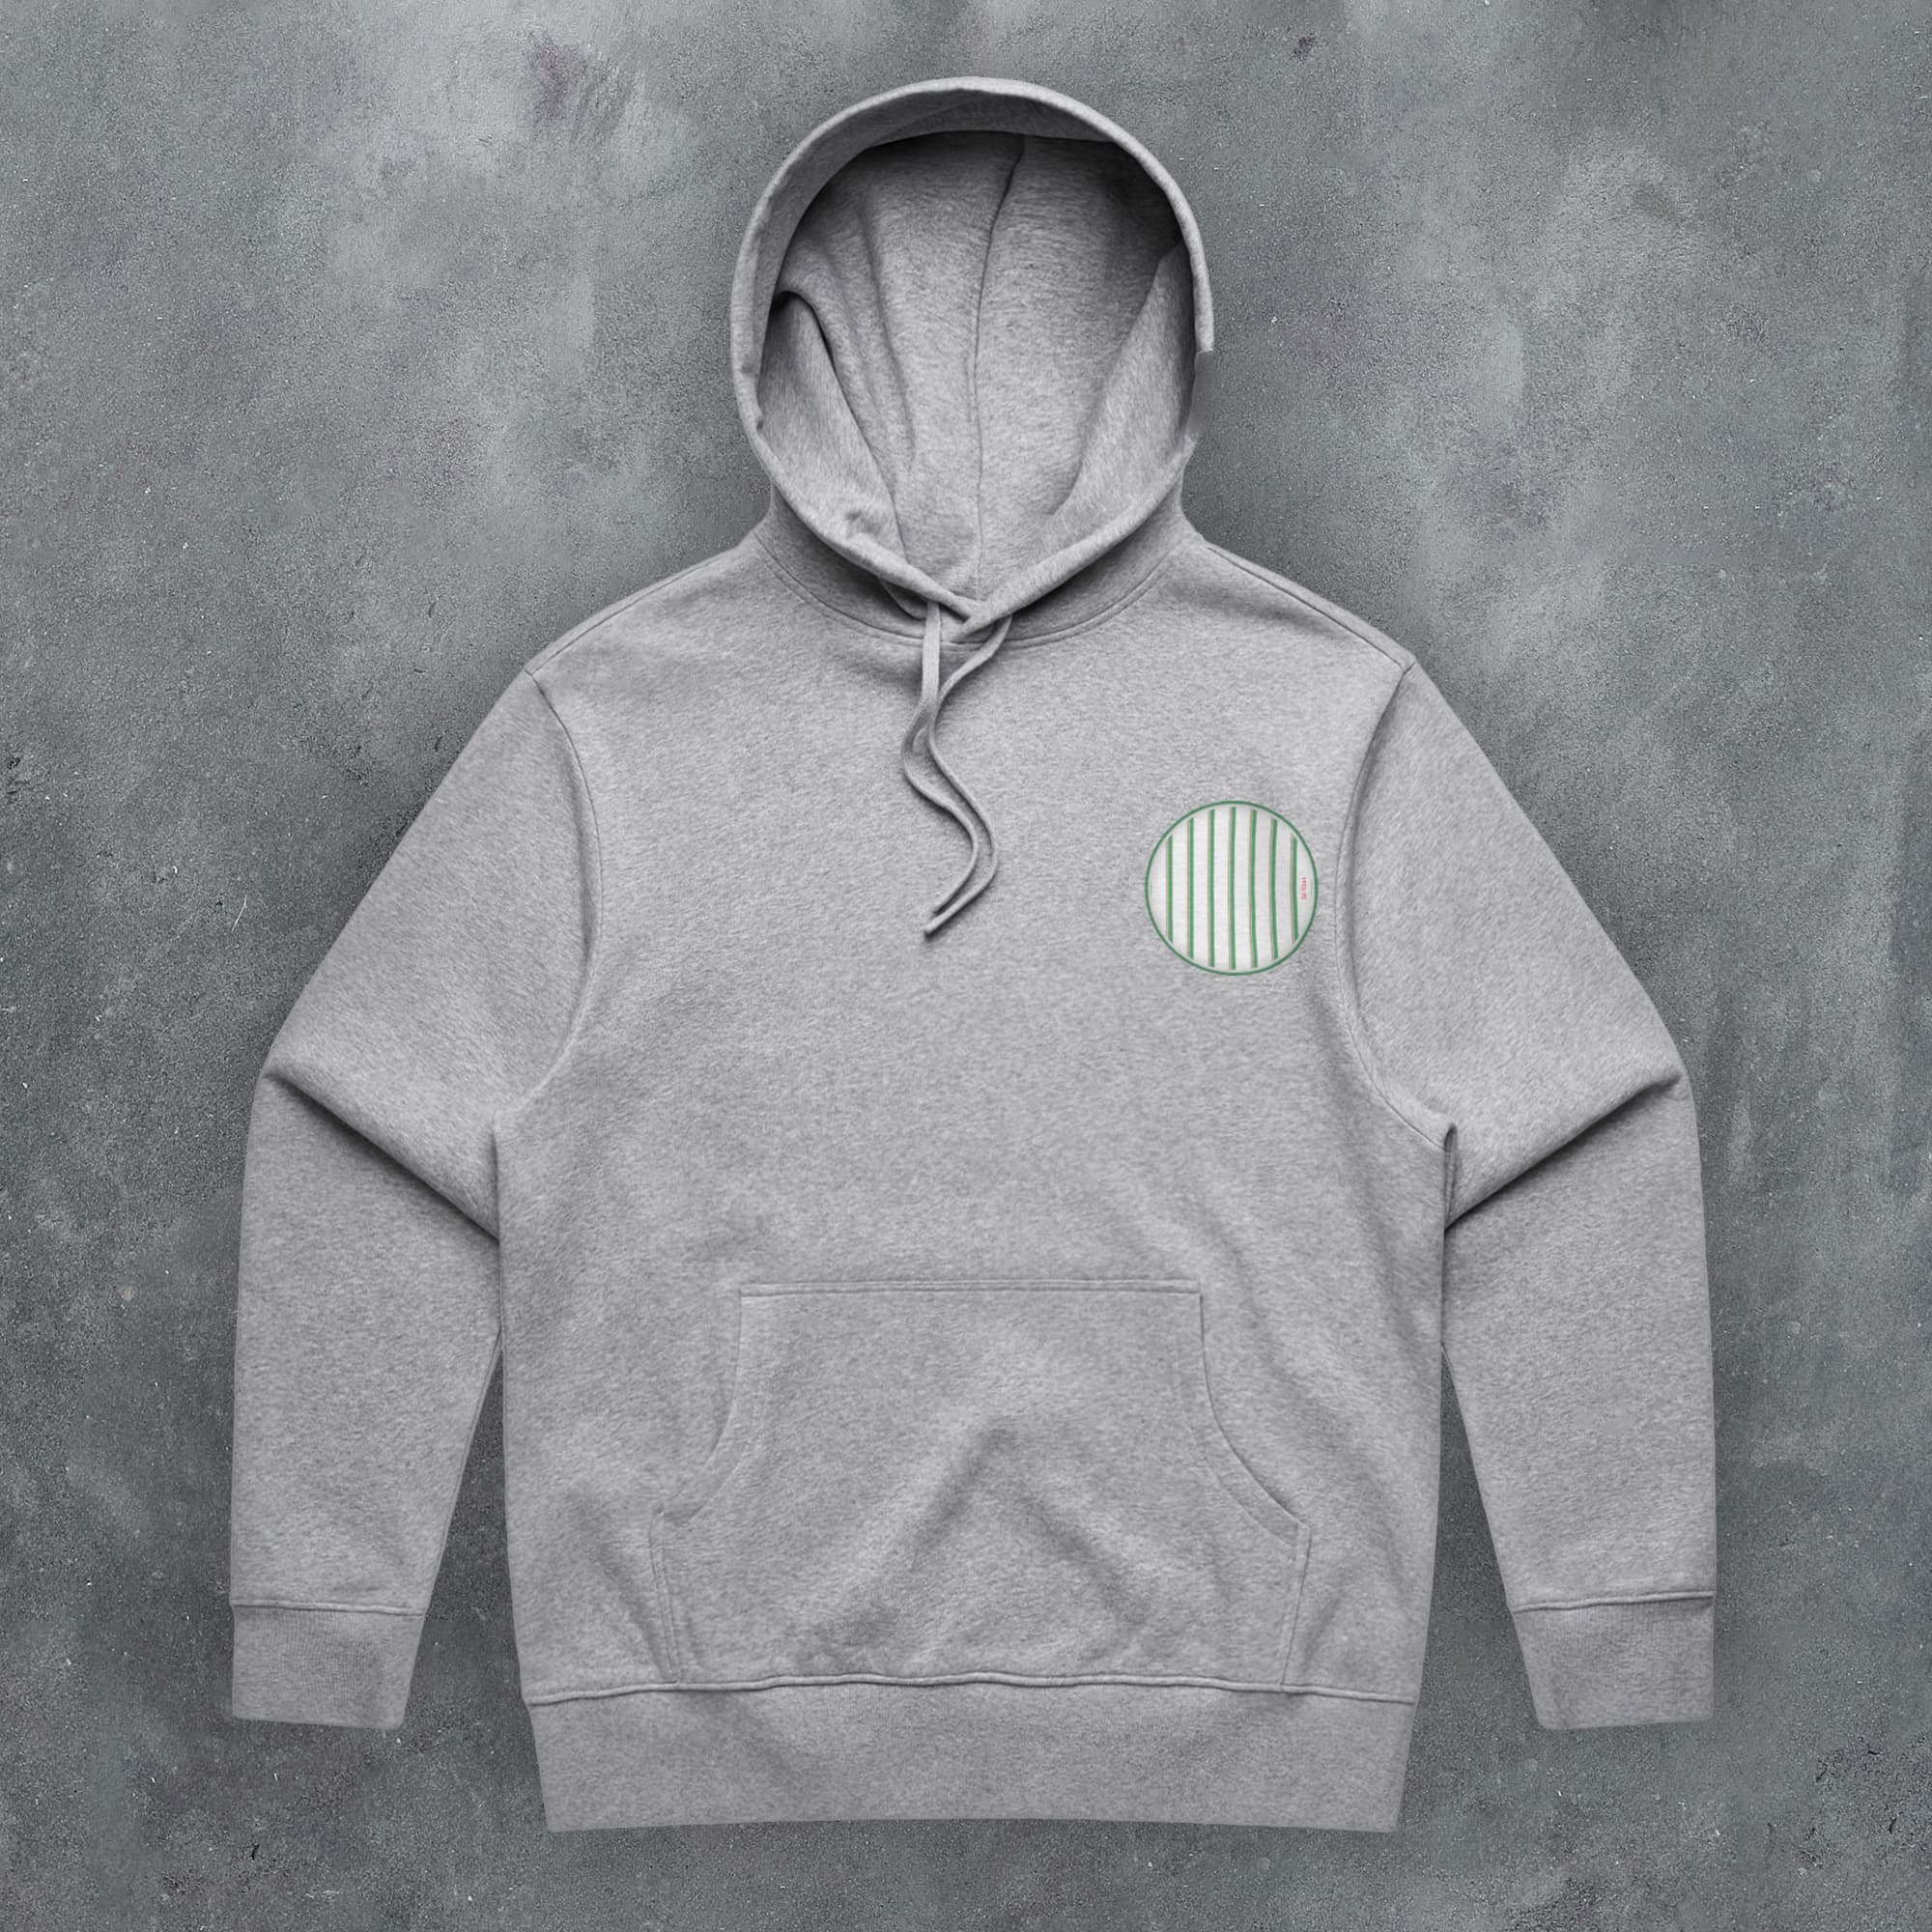 a grey hoodie with a green circle on it